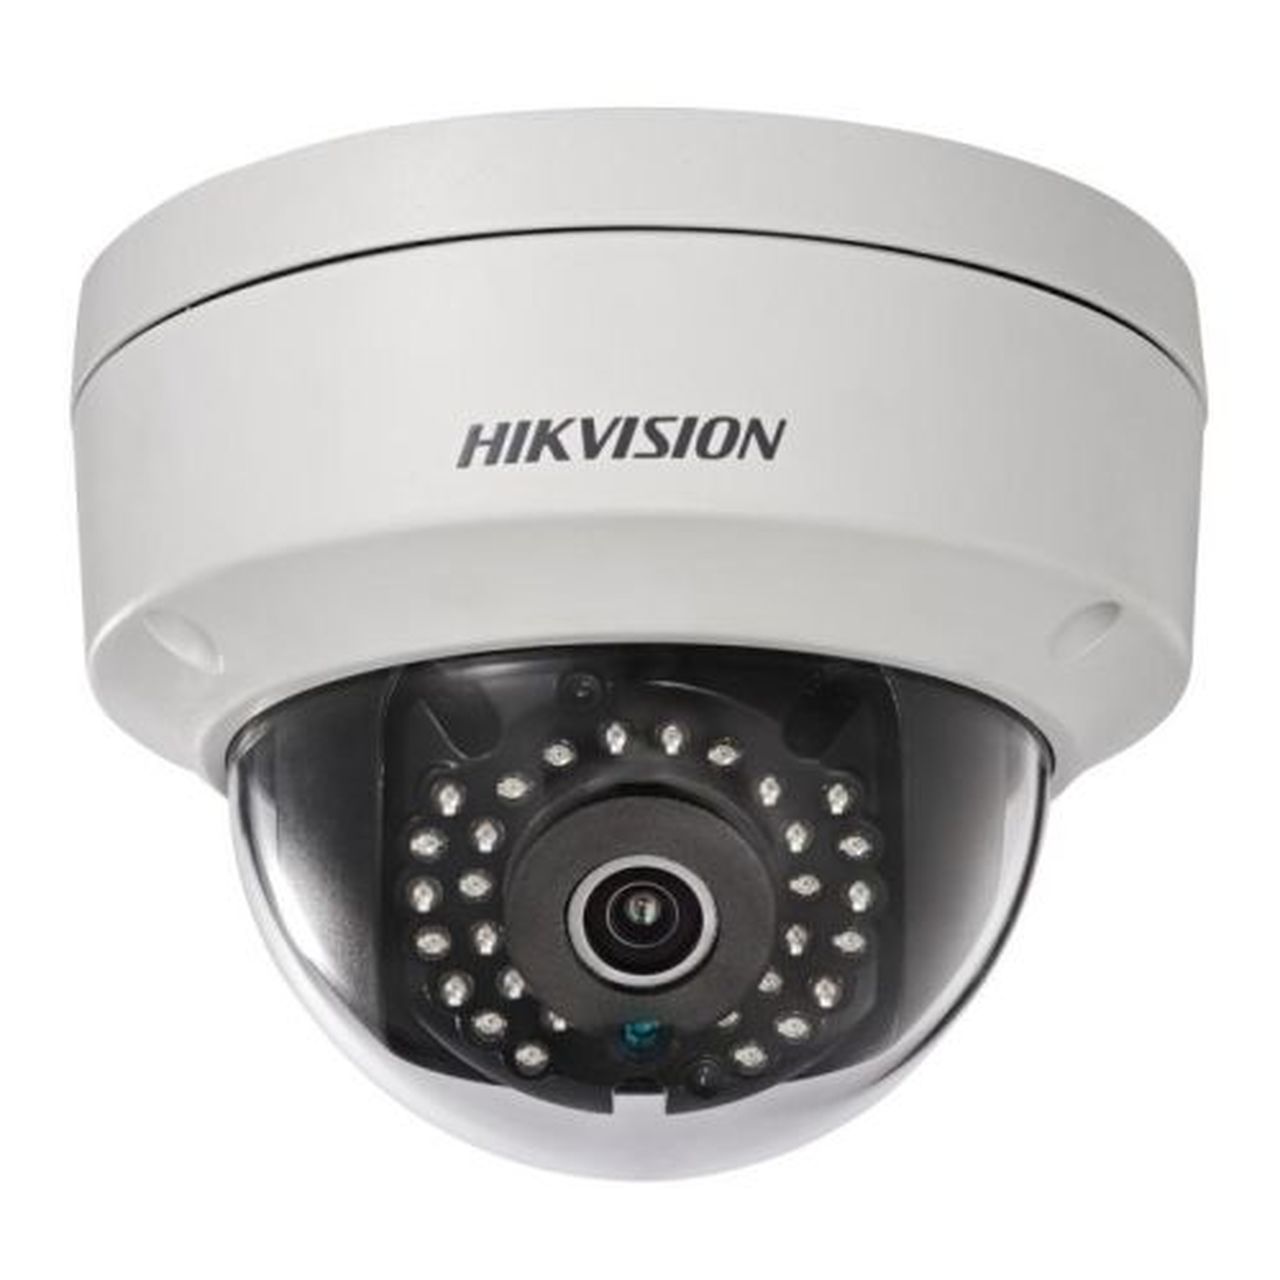 HIKVISION IR FIXED DOME NETWORK CAMERA